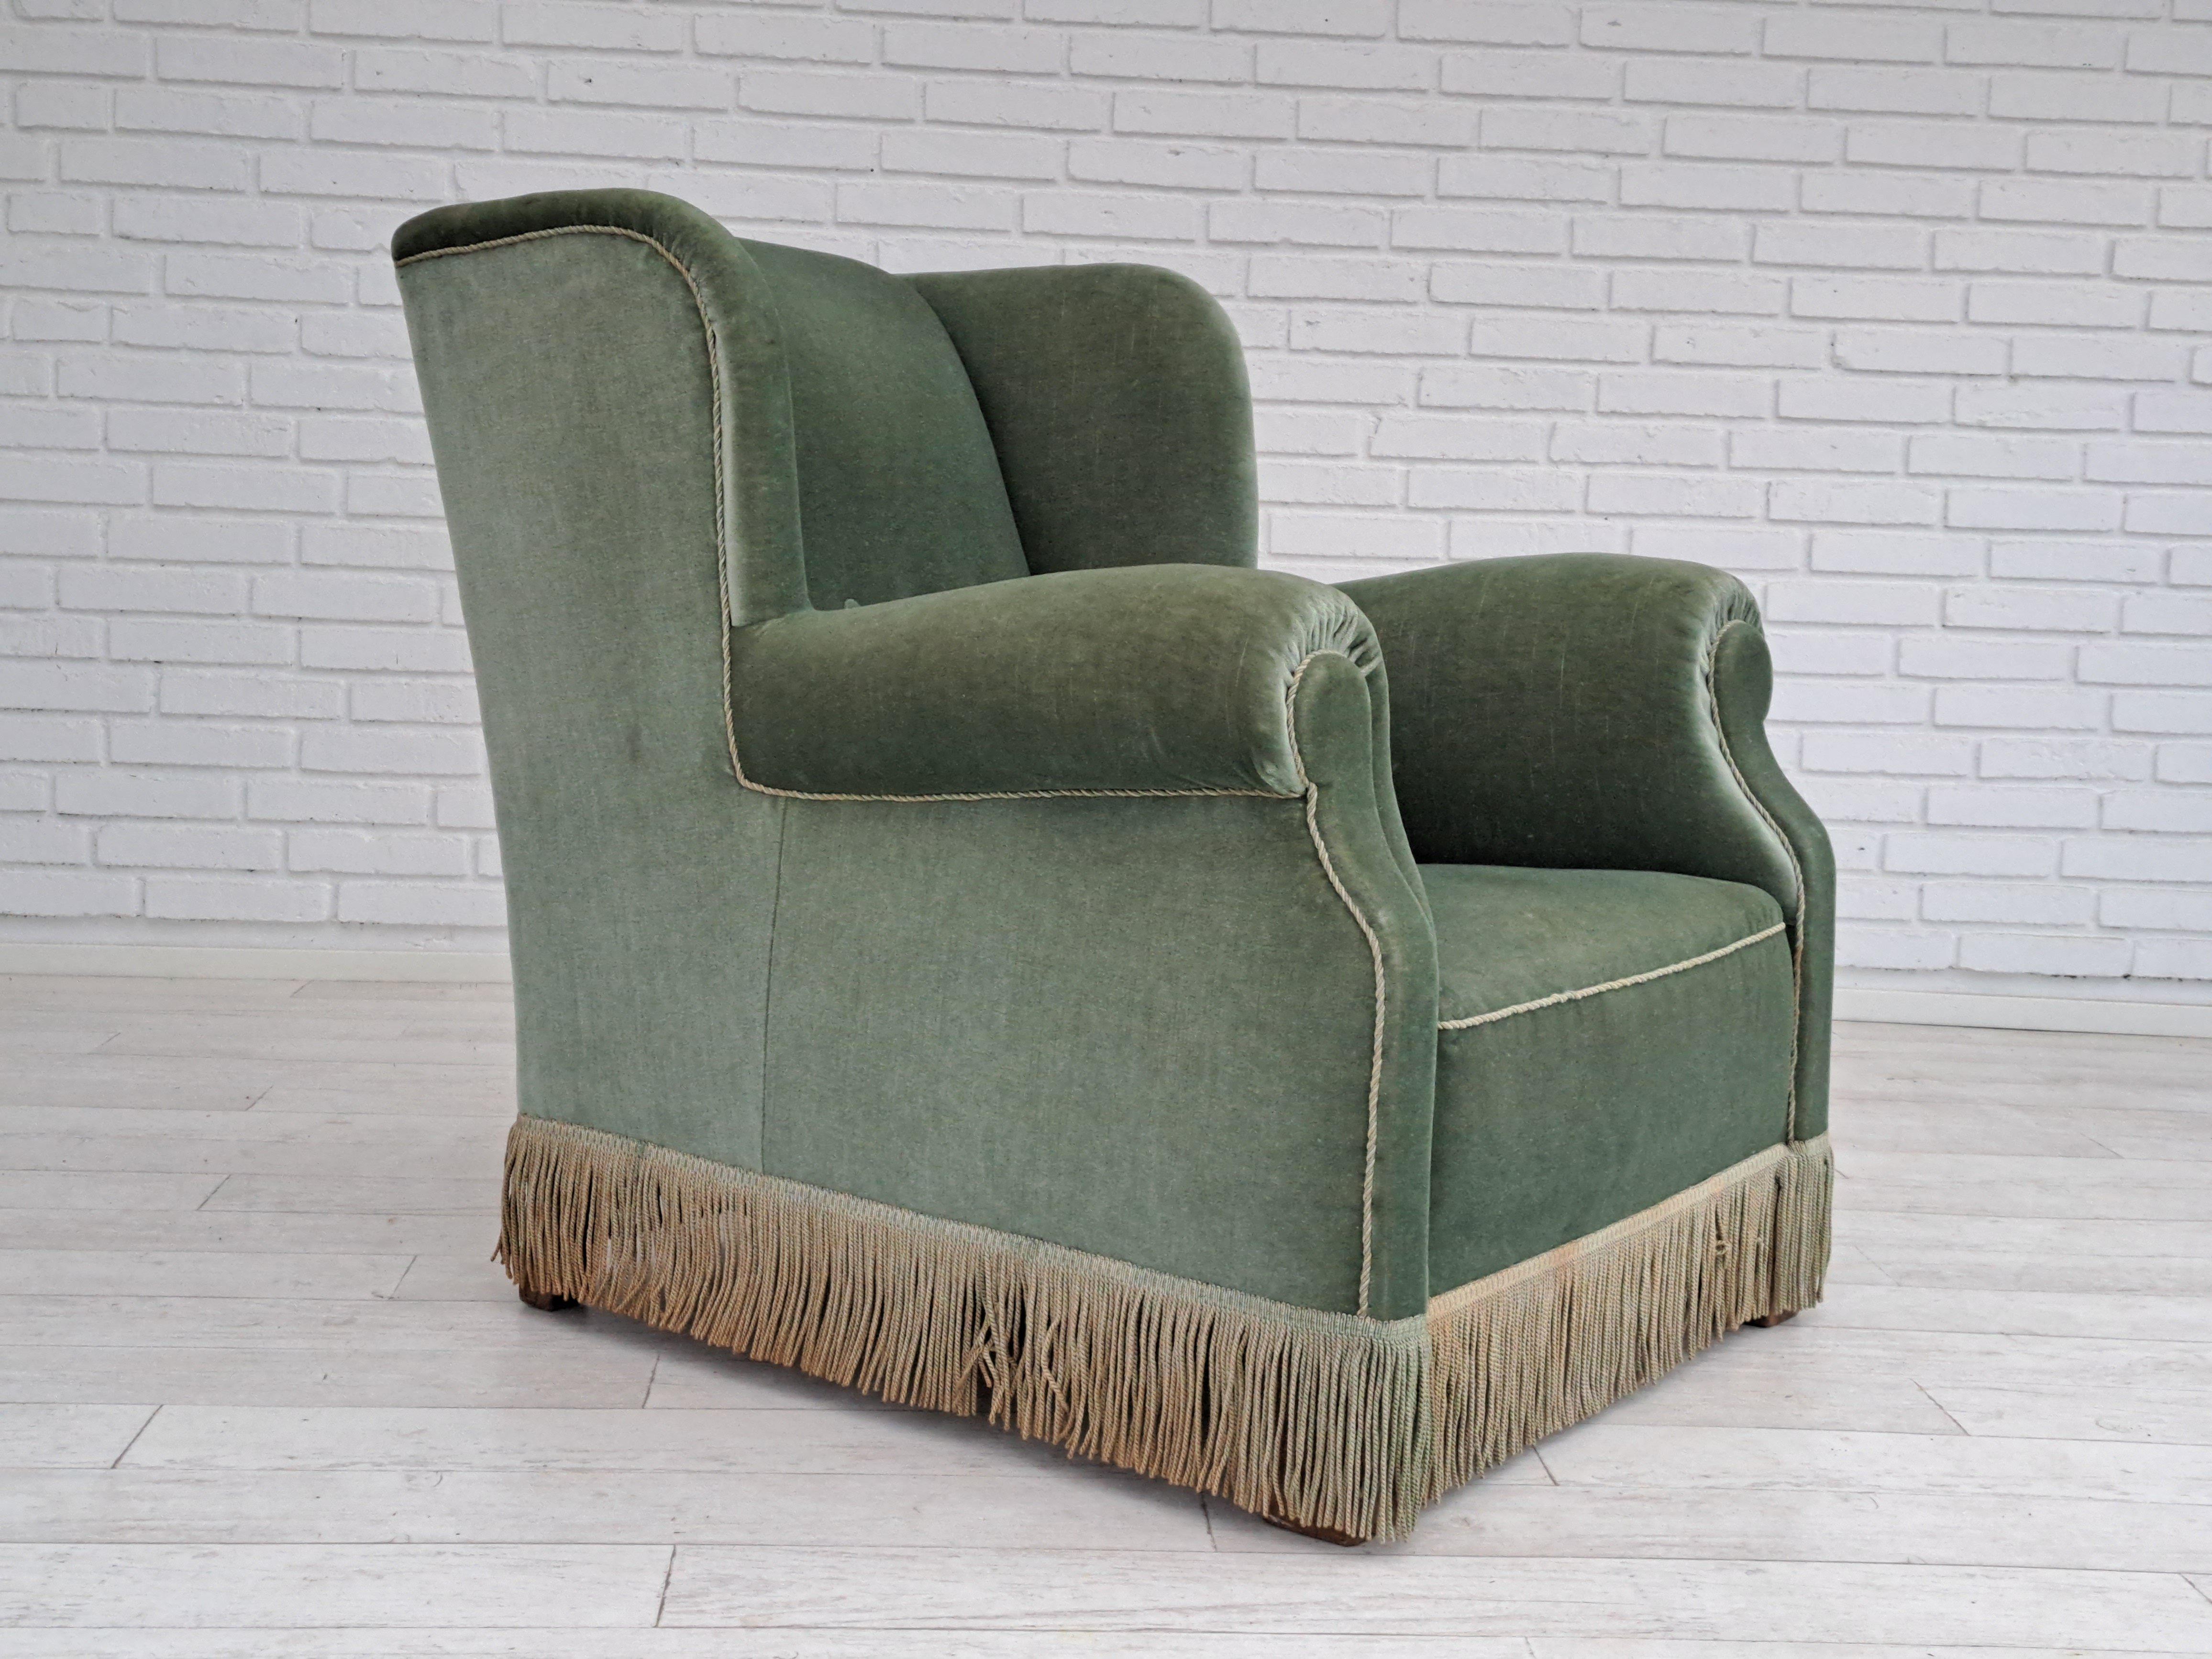 60s, Danish Design by Fritz Hansen, Relax Lounge Chair, Original Condition In Good Condition For Sale In Tarm, 82